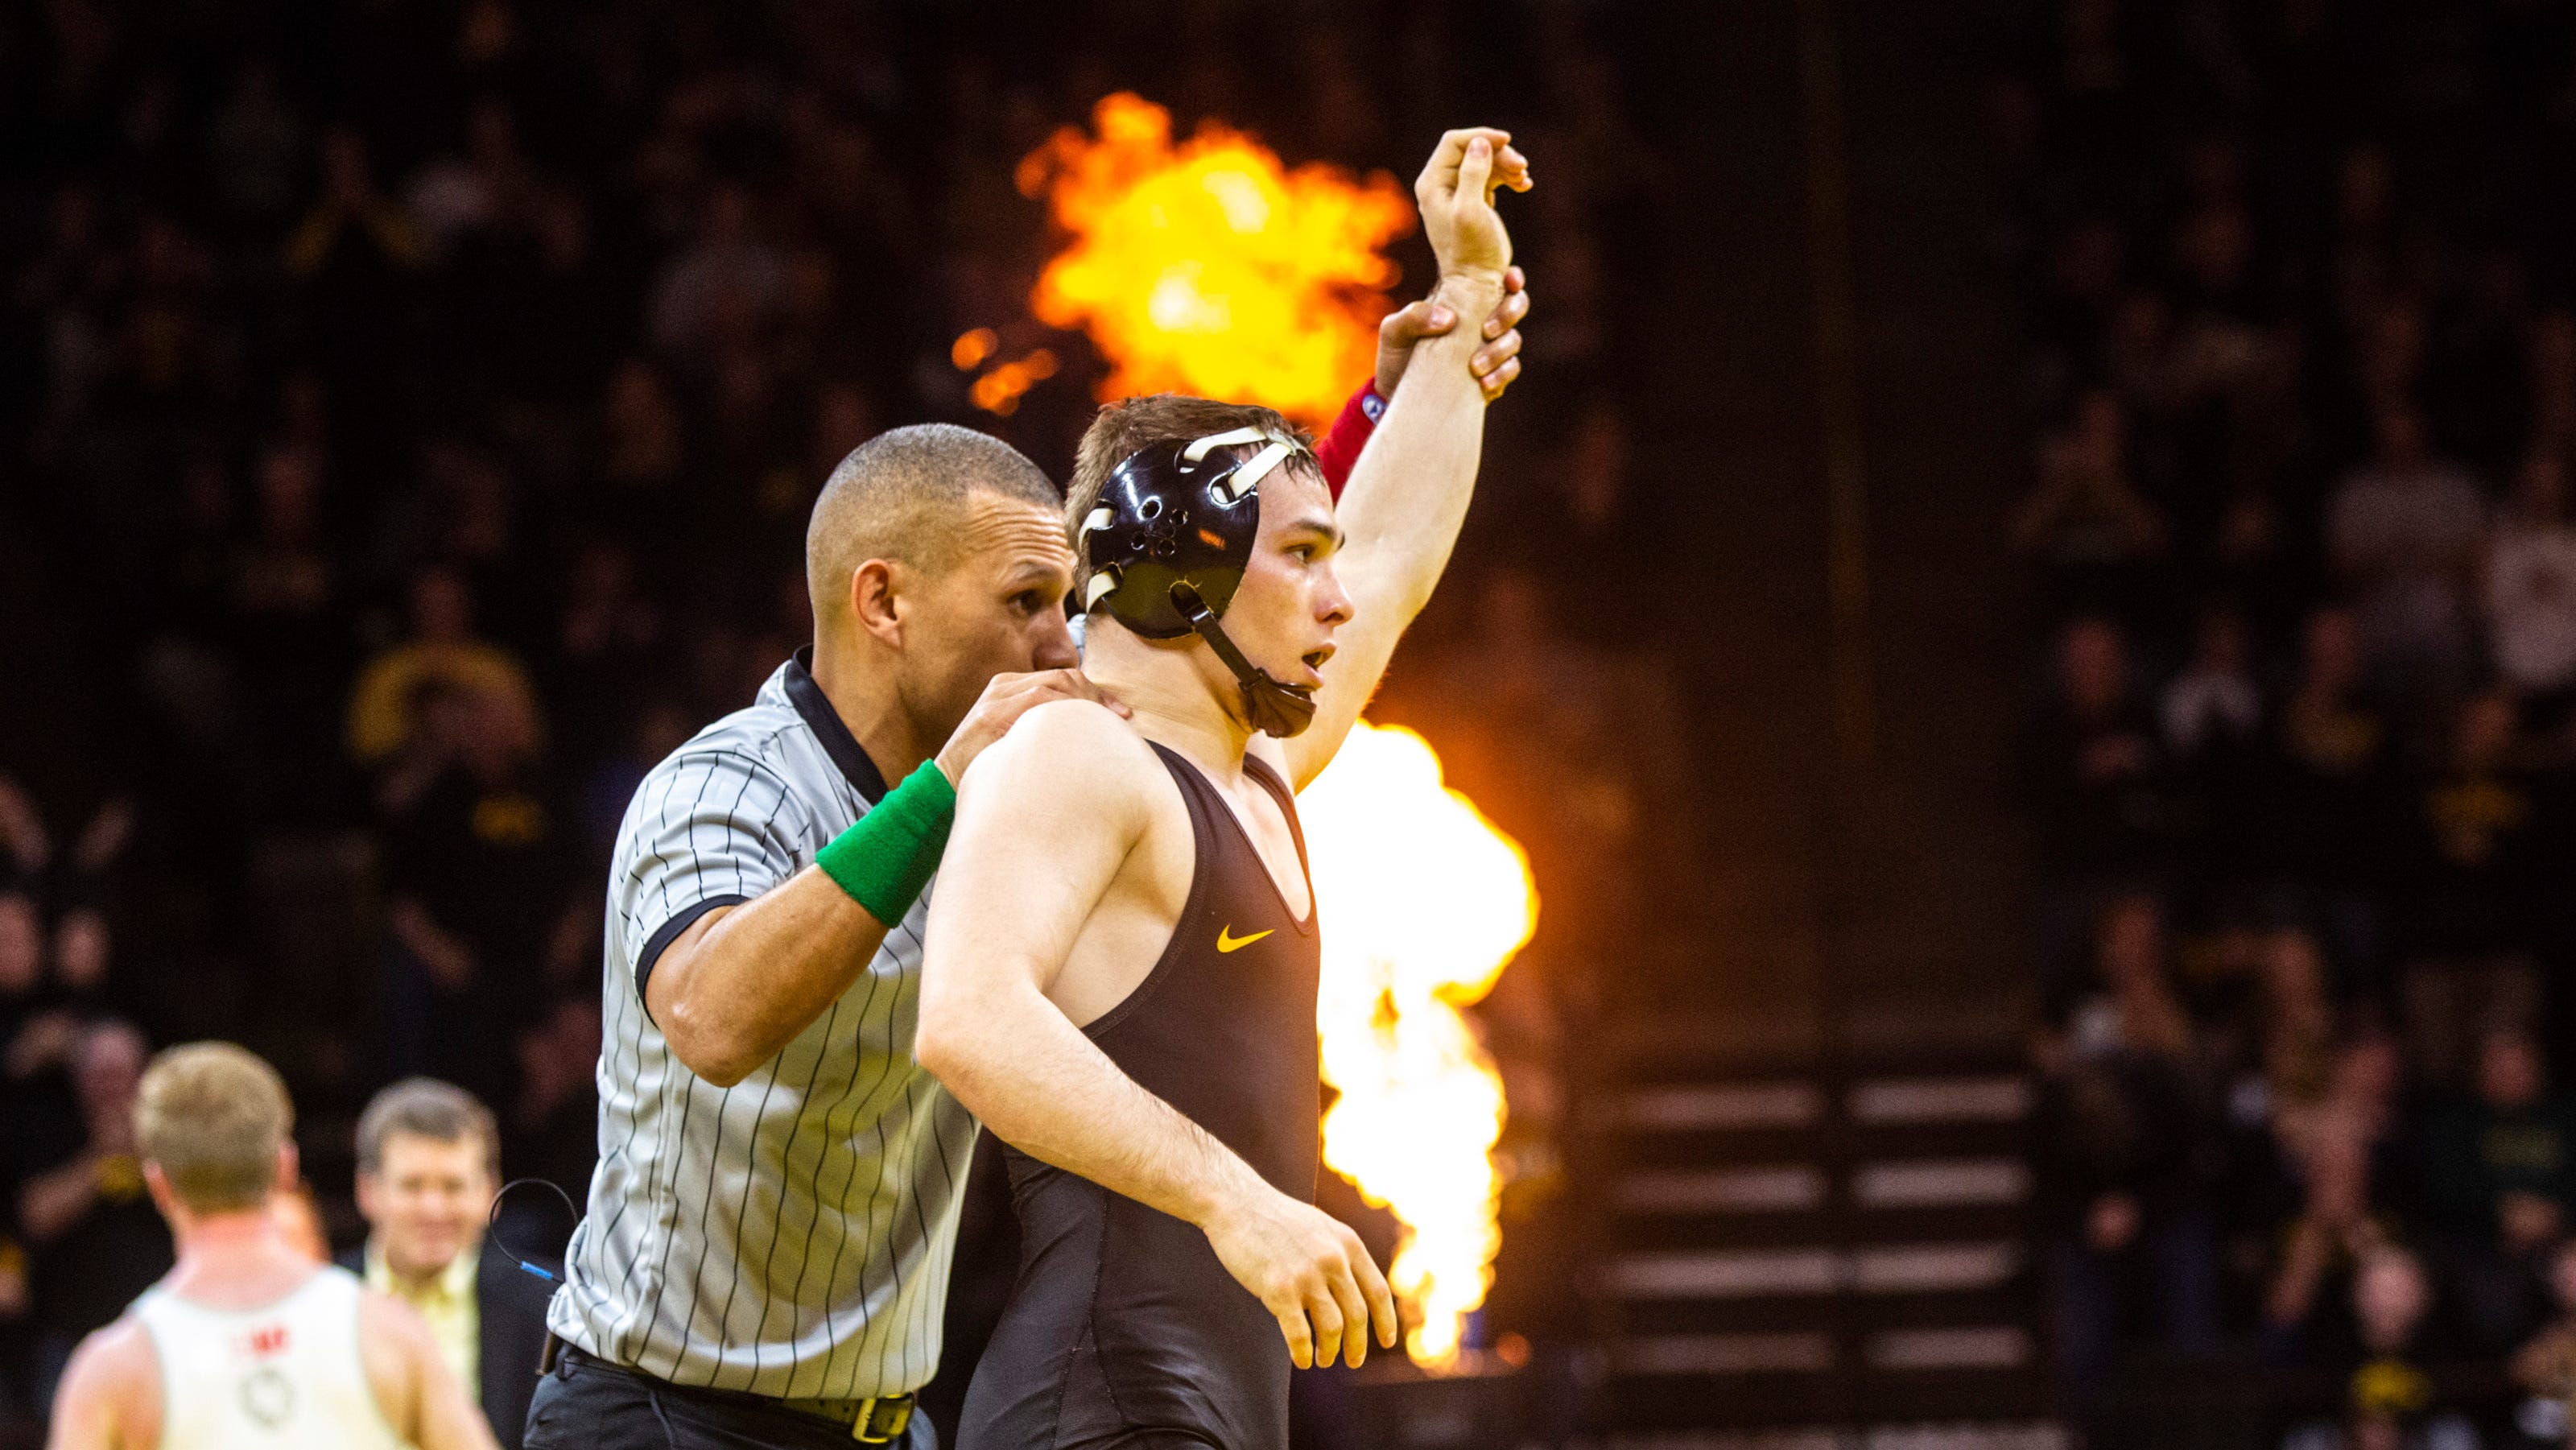 Most dominant college athlete in the country? Iowa wrestler Spencer Lee